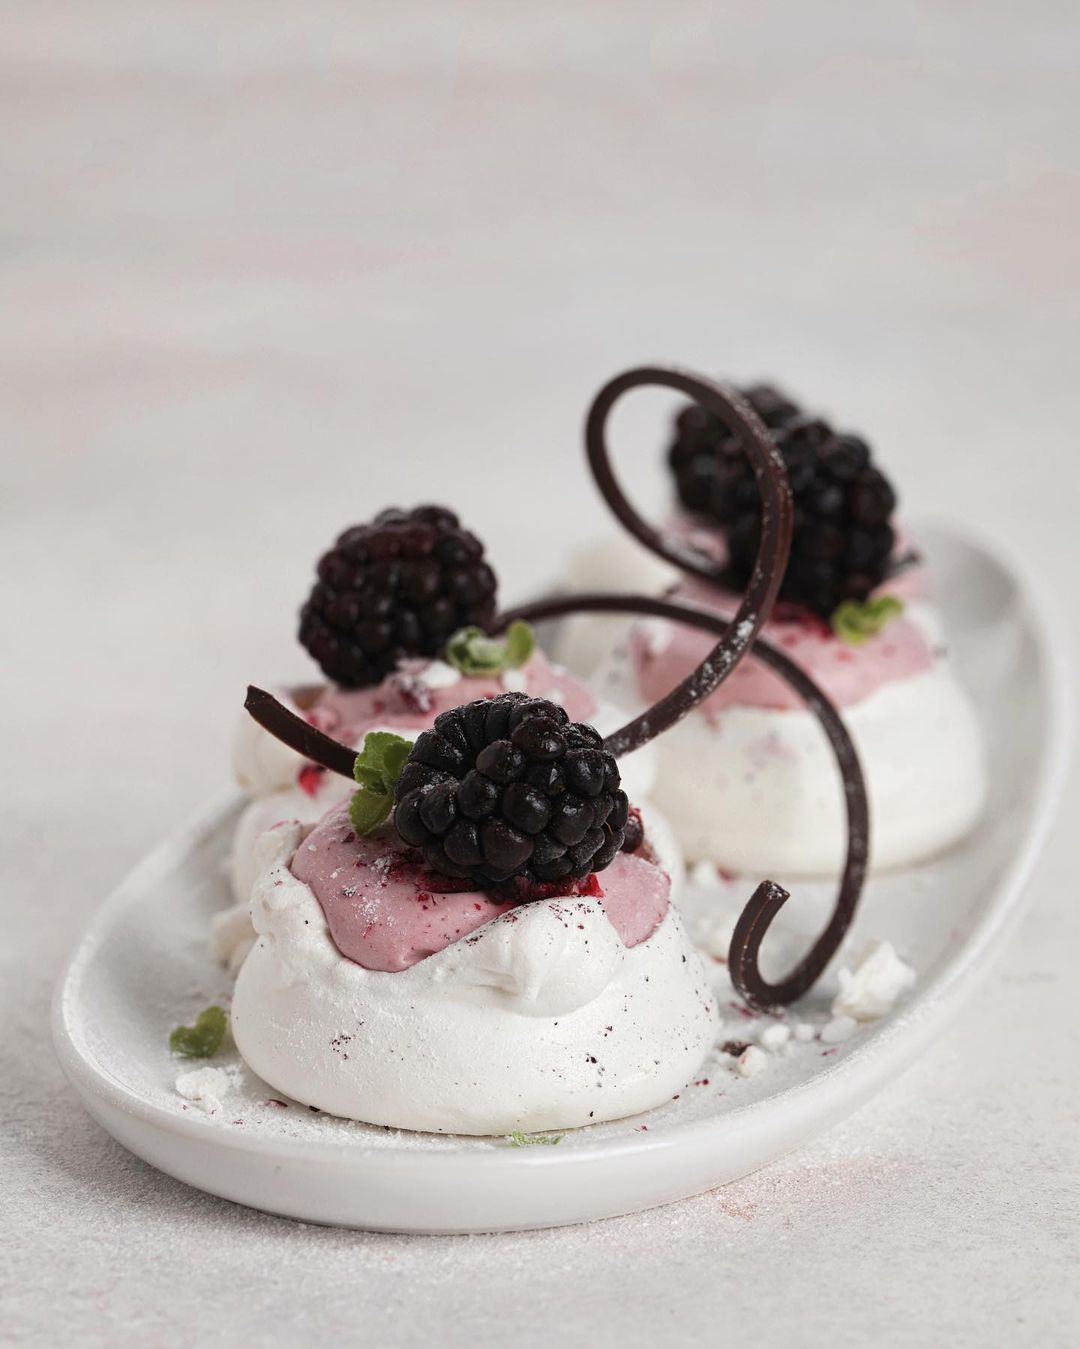 Meringue clouds with blackberry filling